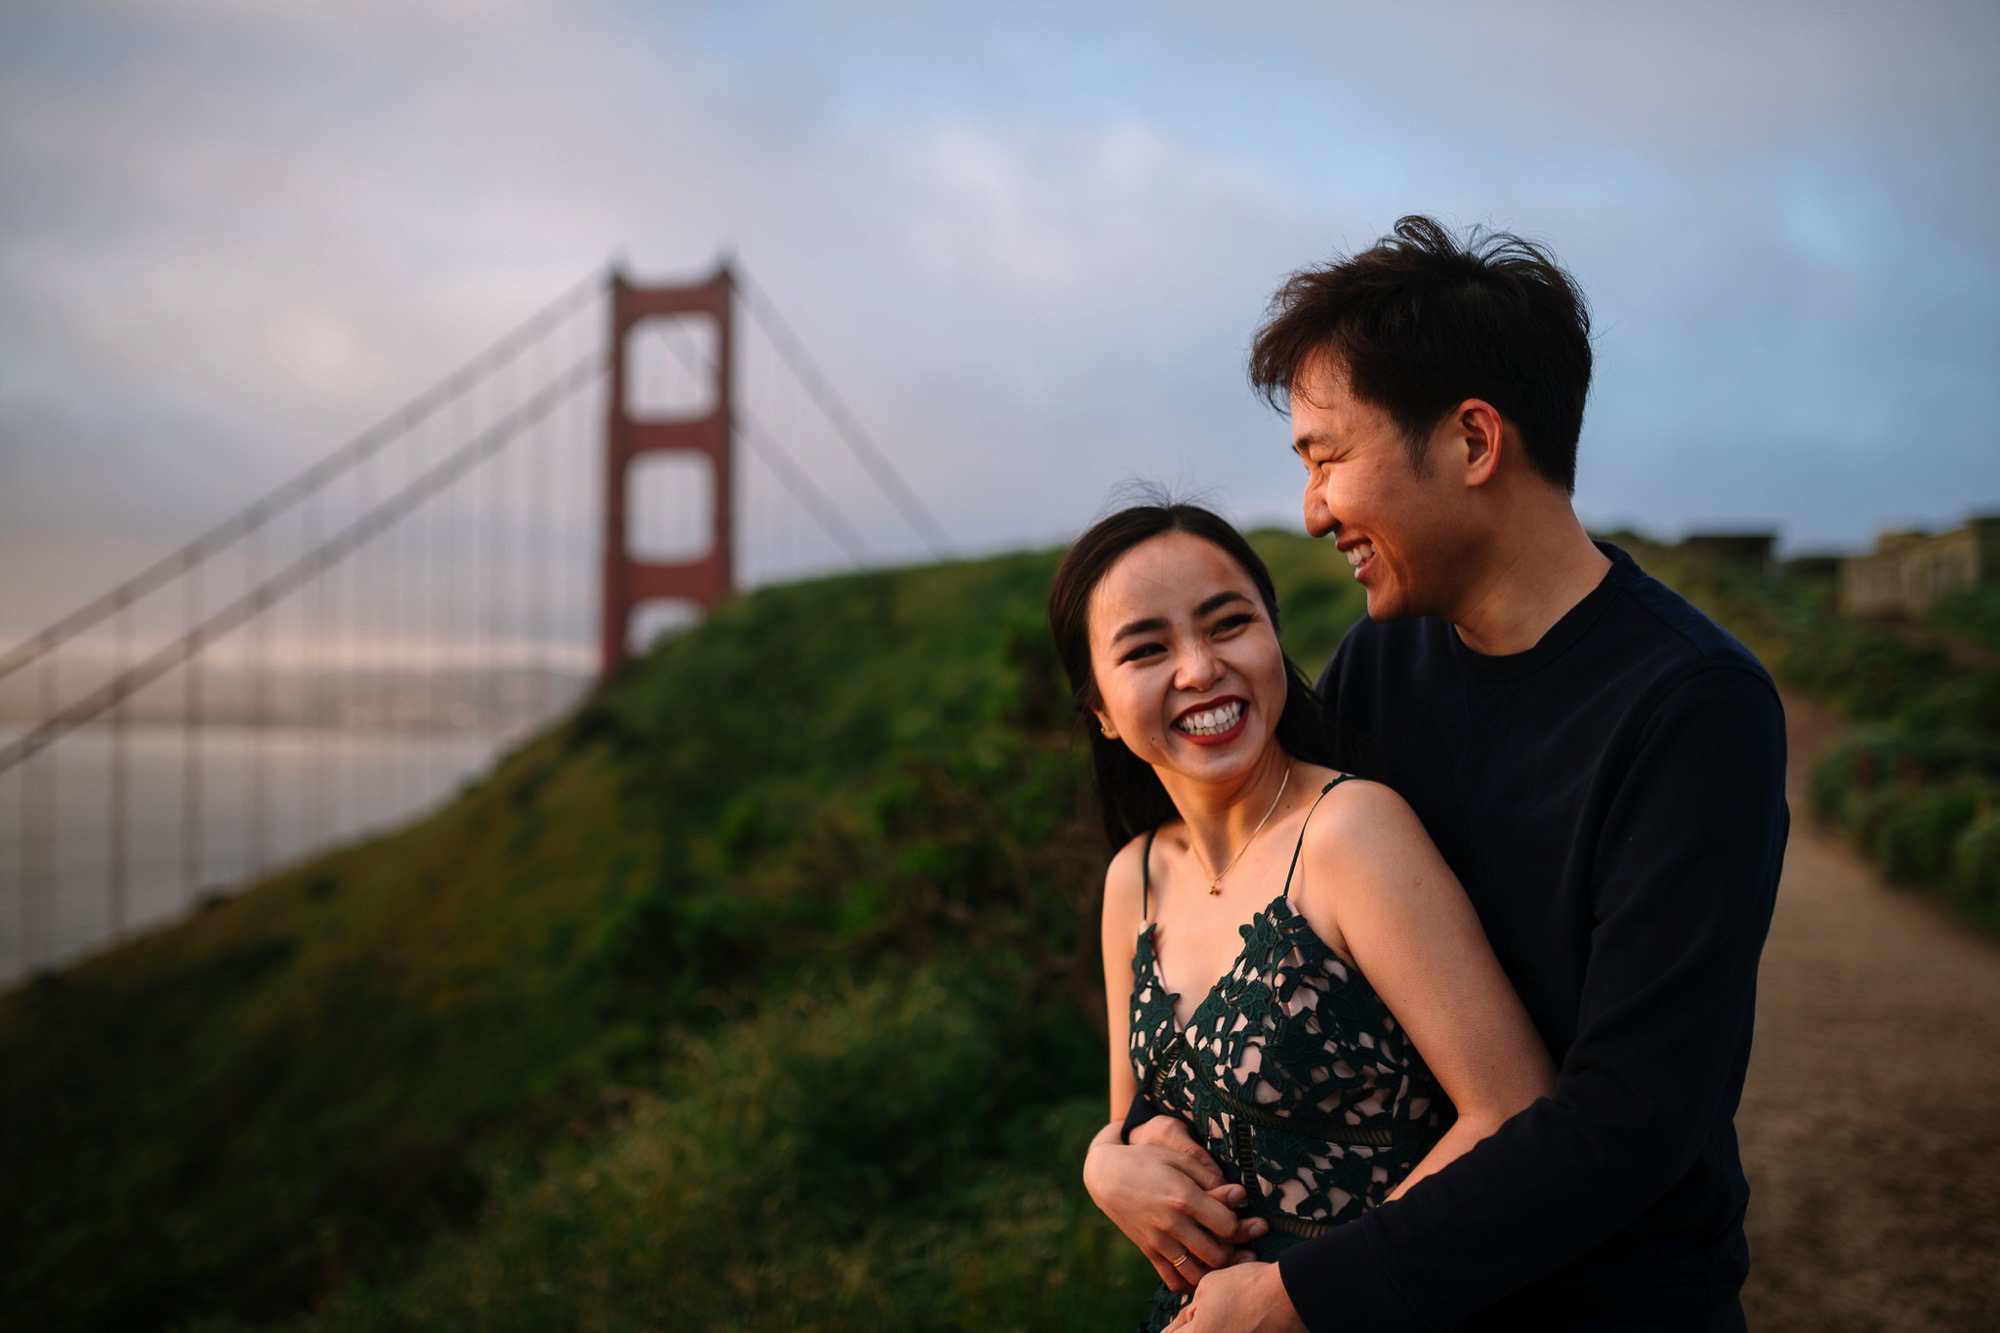  Marin Headlands Engagement Session // Alan + Thu - Photo by Trung Hoang Photography | www.trunghoangphotography.com | San Francisco Bay Area Wedding Photographer 